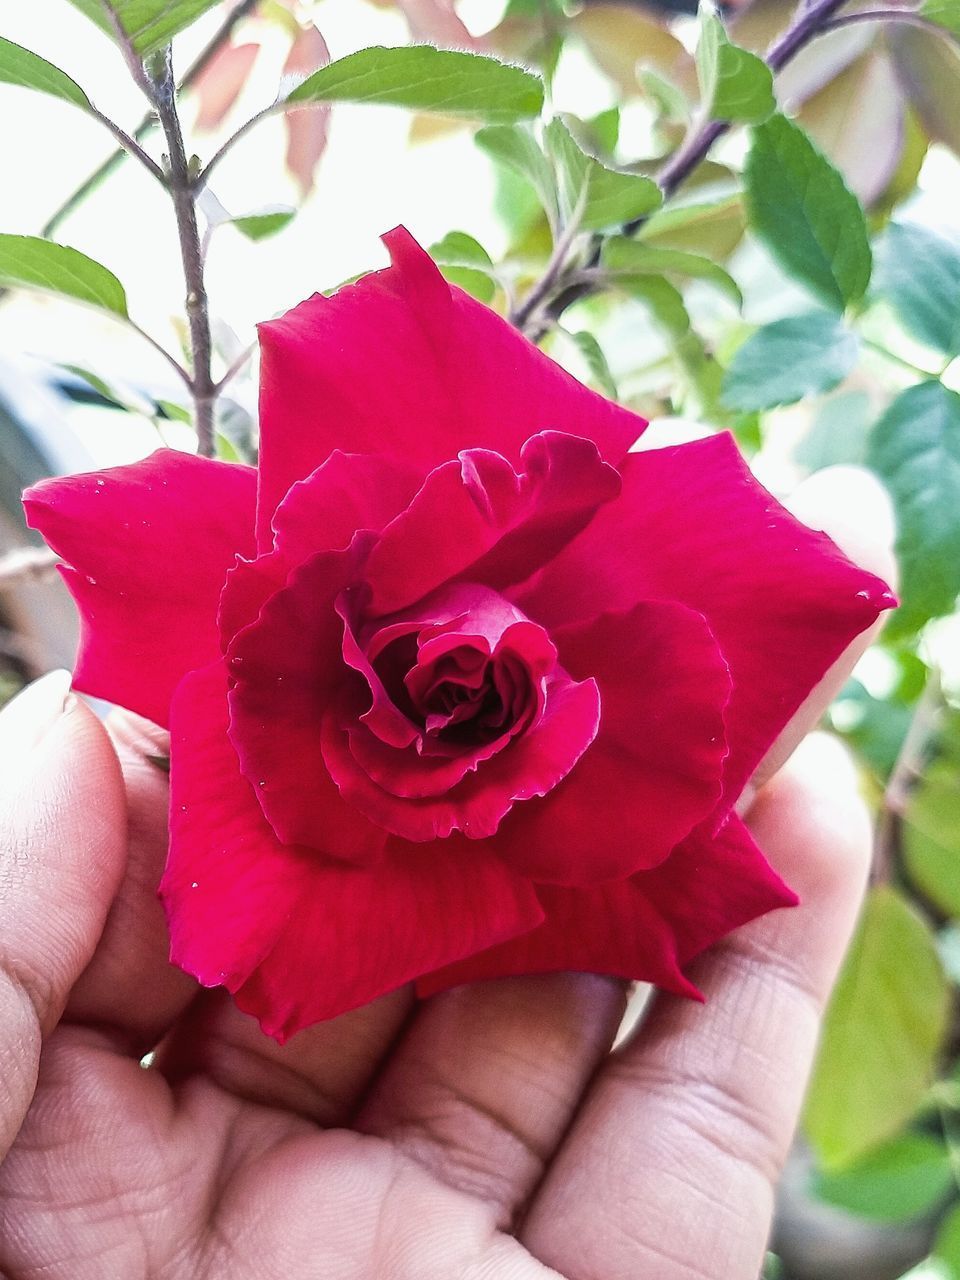 CLOSE-UP OF HAND HOLDING RED ROSE FLOWER